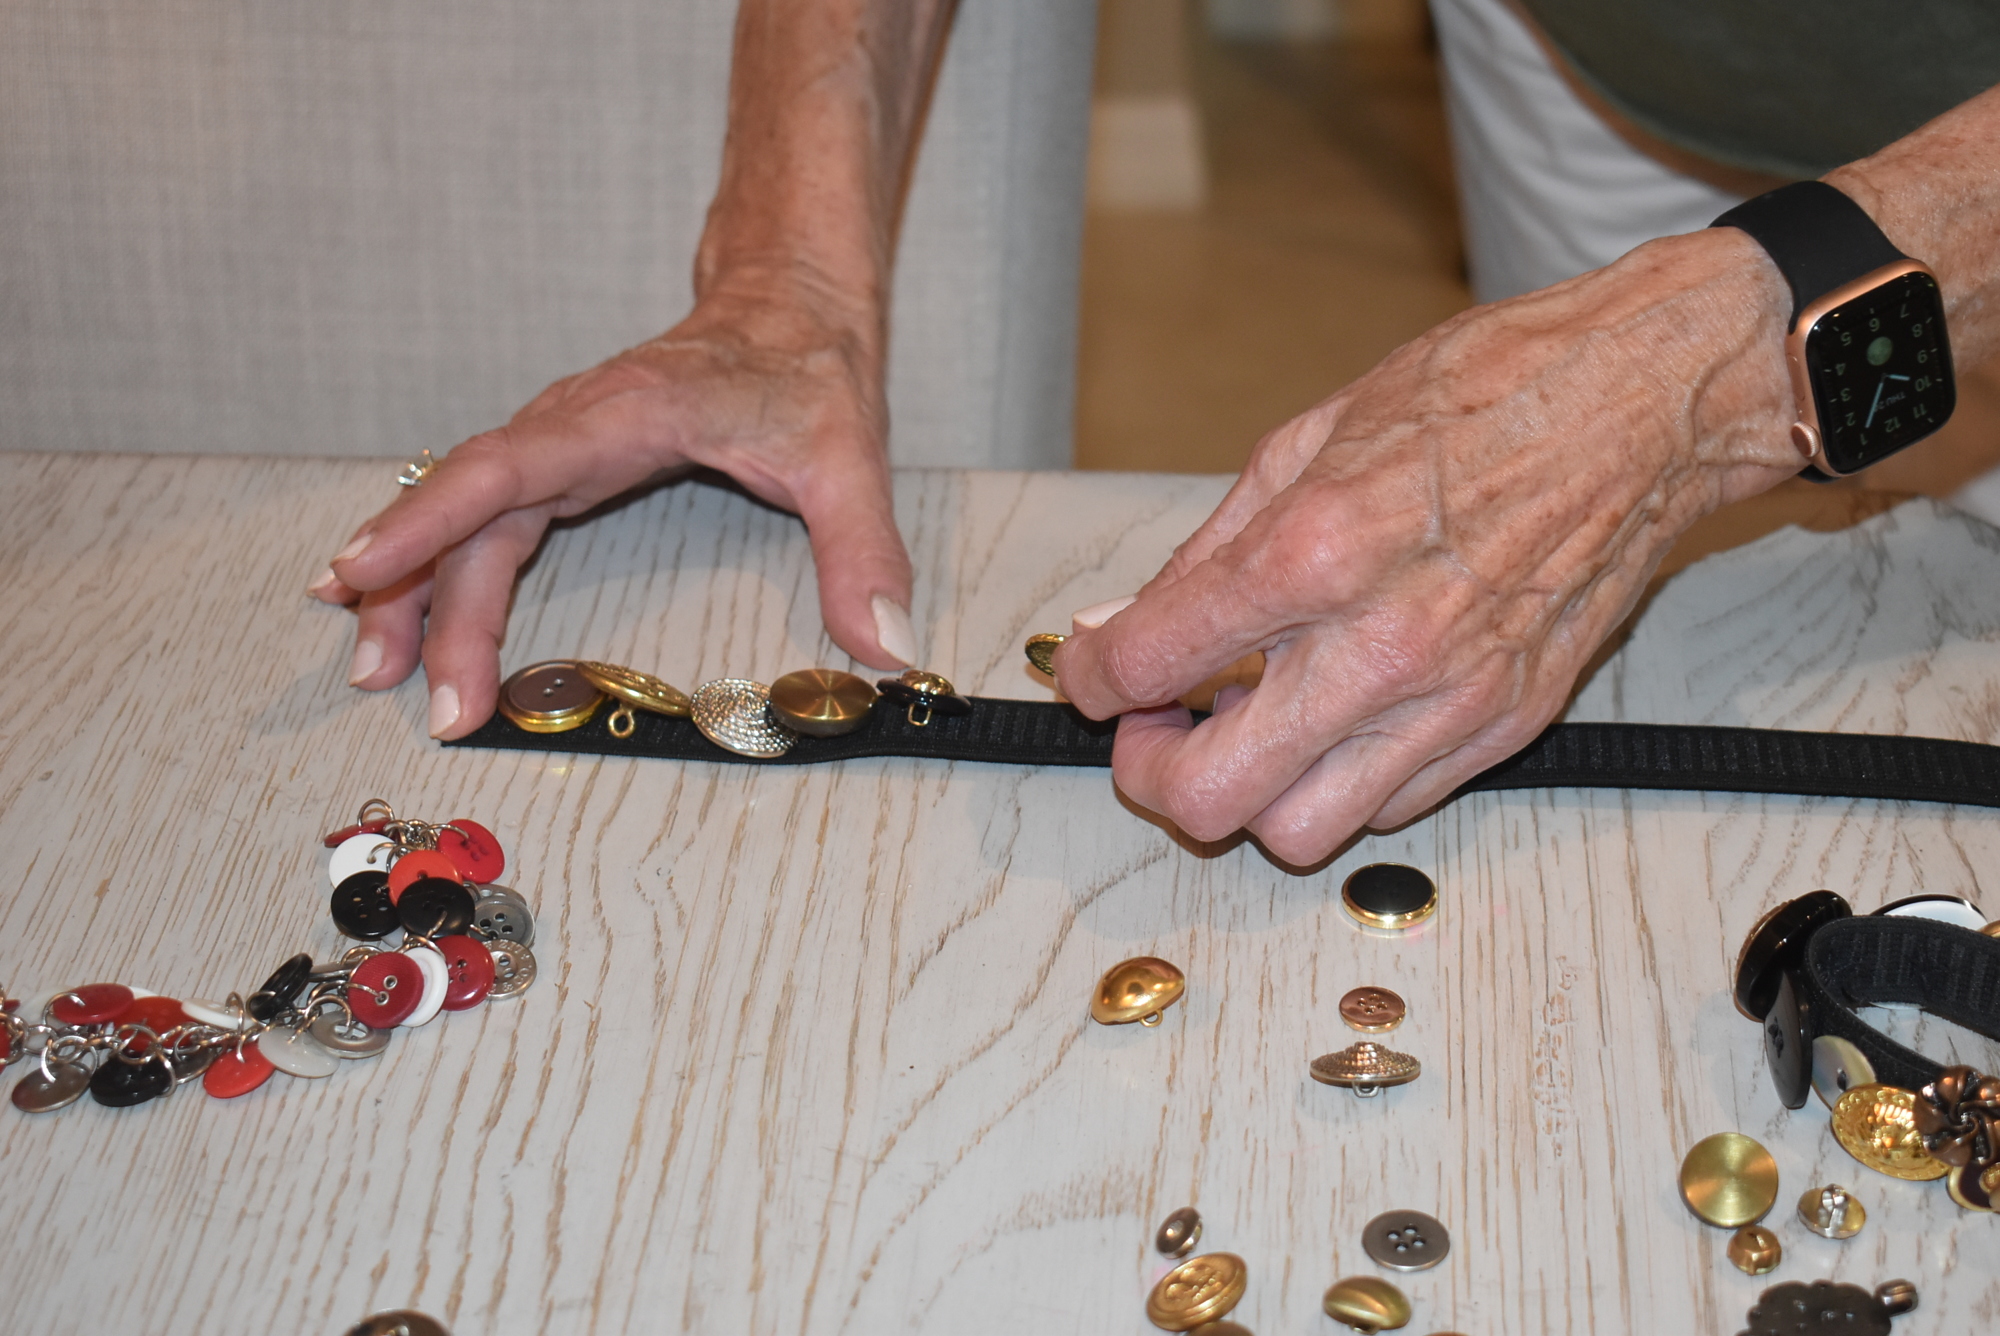 University Park resident Marlene Meyer, who owns Marlene's Finds and Designs, often uses customers' old buttons to create new items such as bracelets.